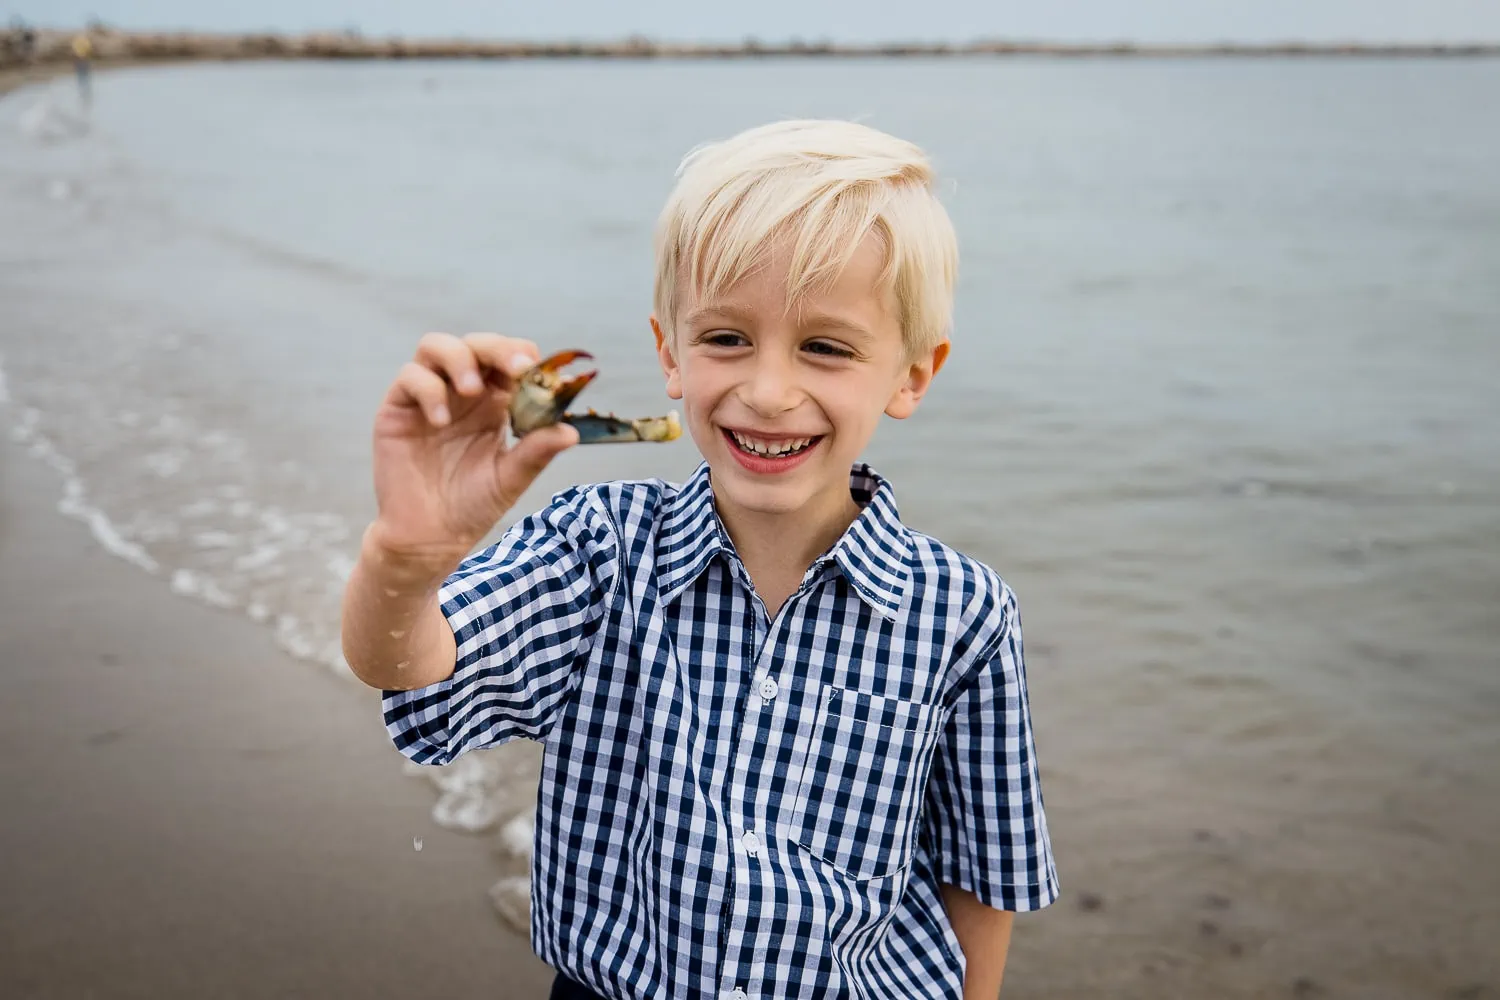 A little blonde boy in gingham shirt holds up a crab claw at the beach